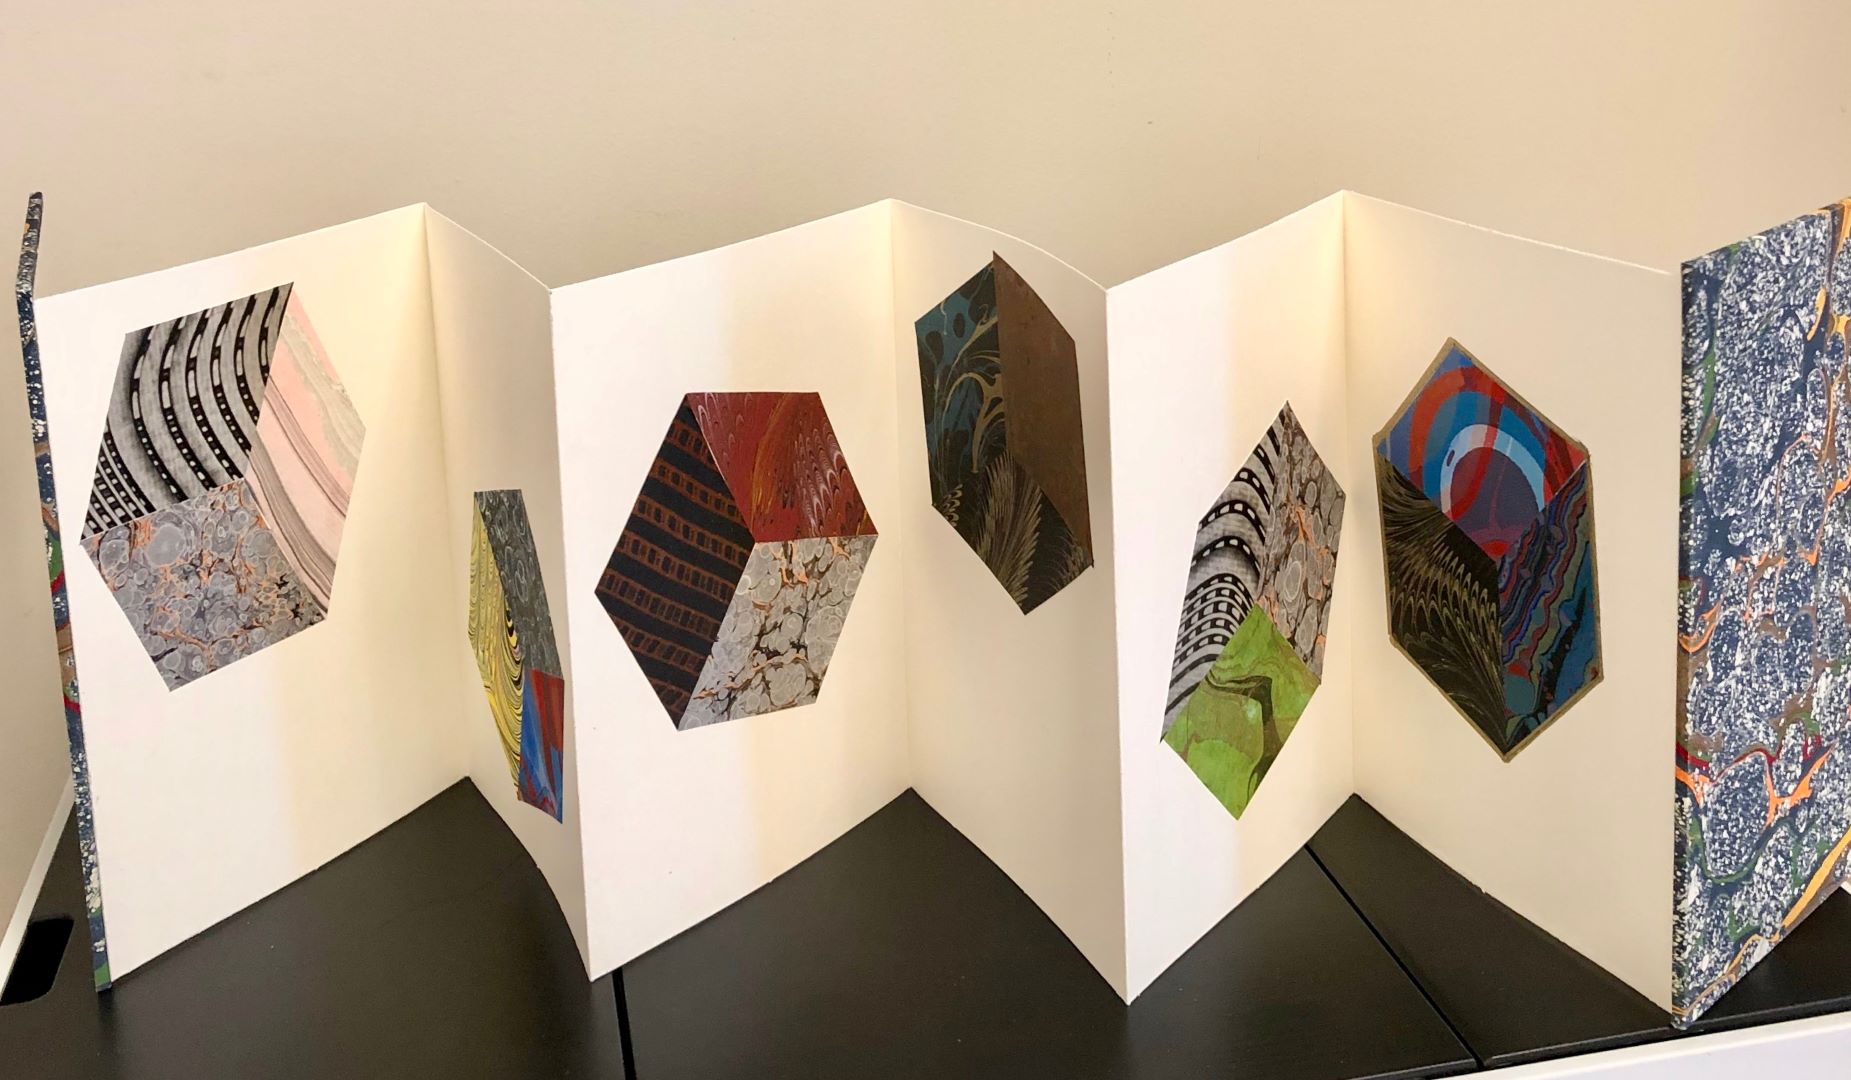 Accordion Book Structure with Marbled Paper Cubes by Laurel Rogers